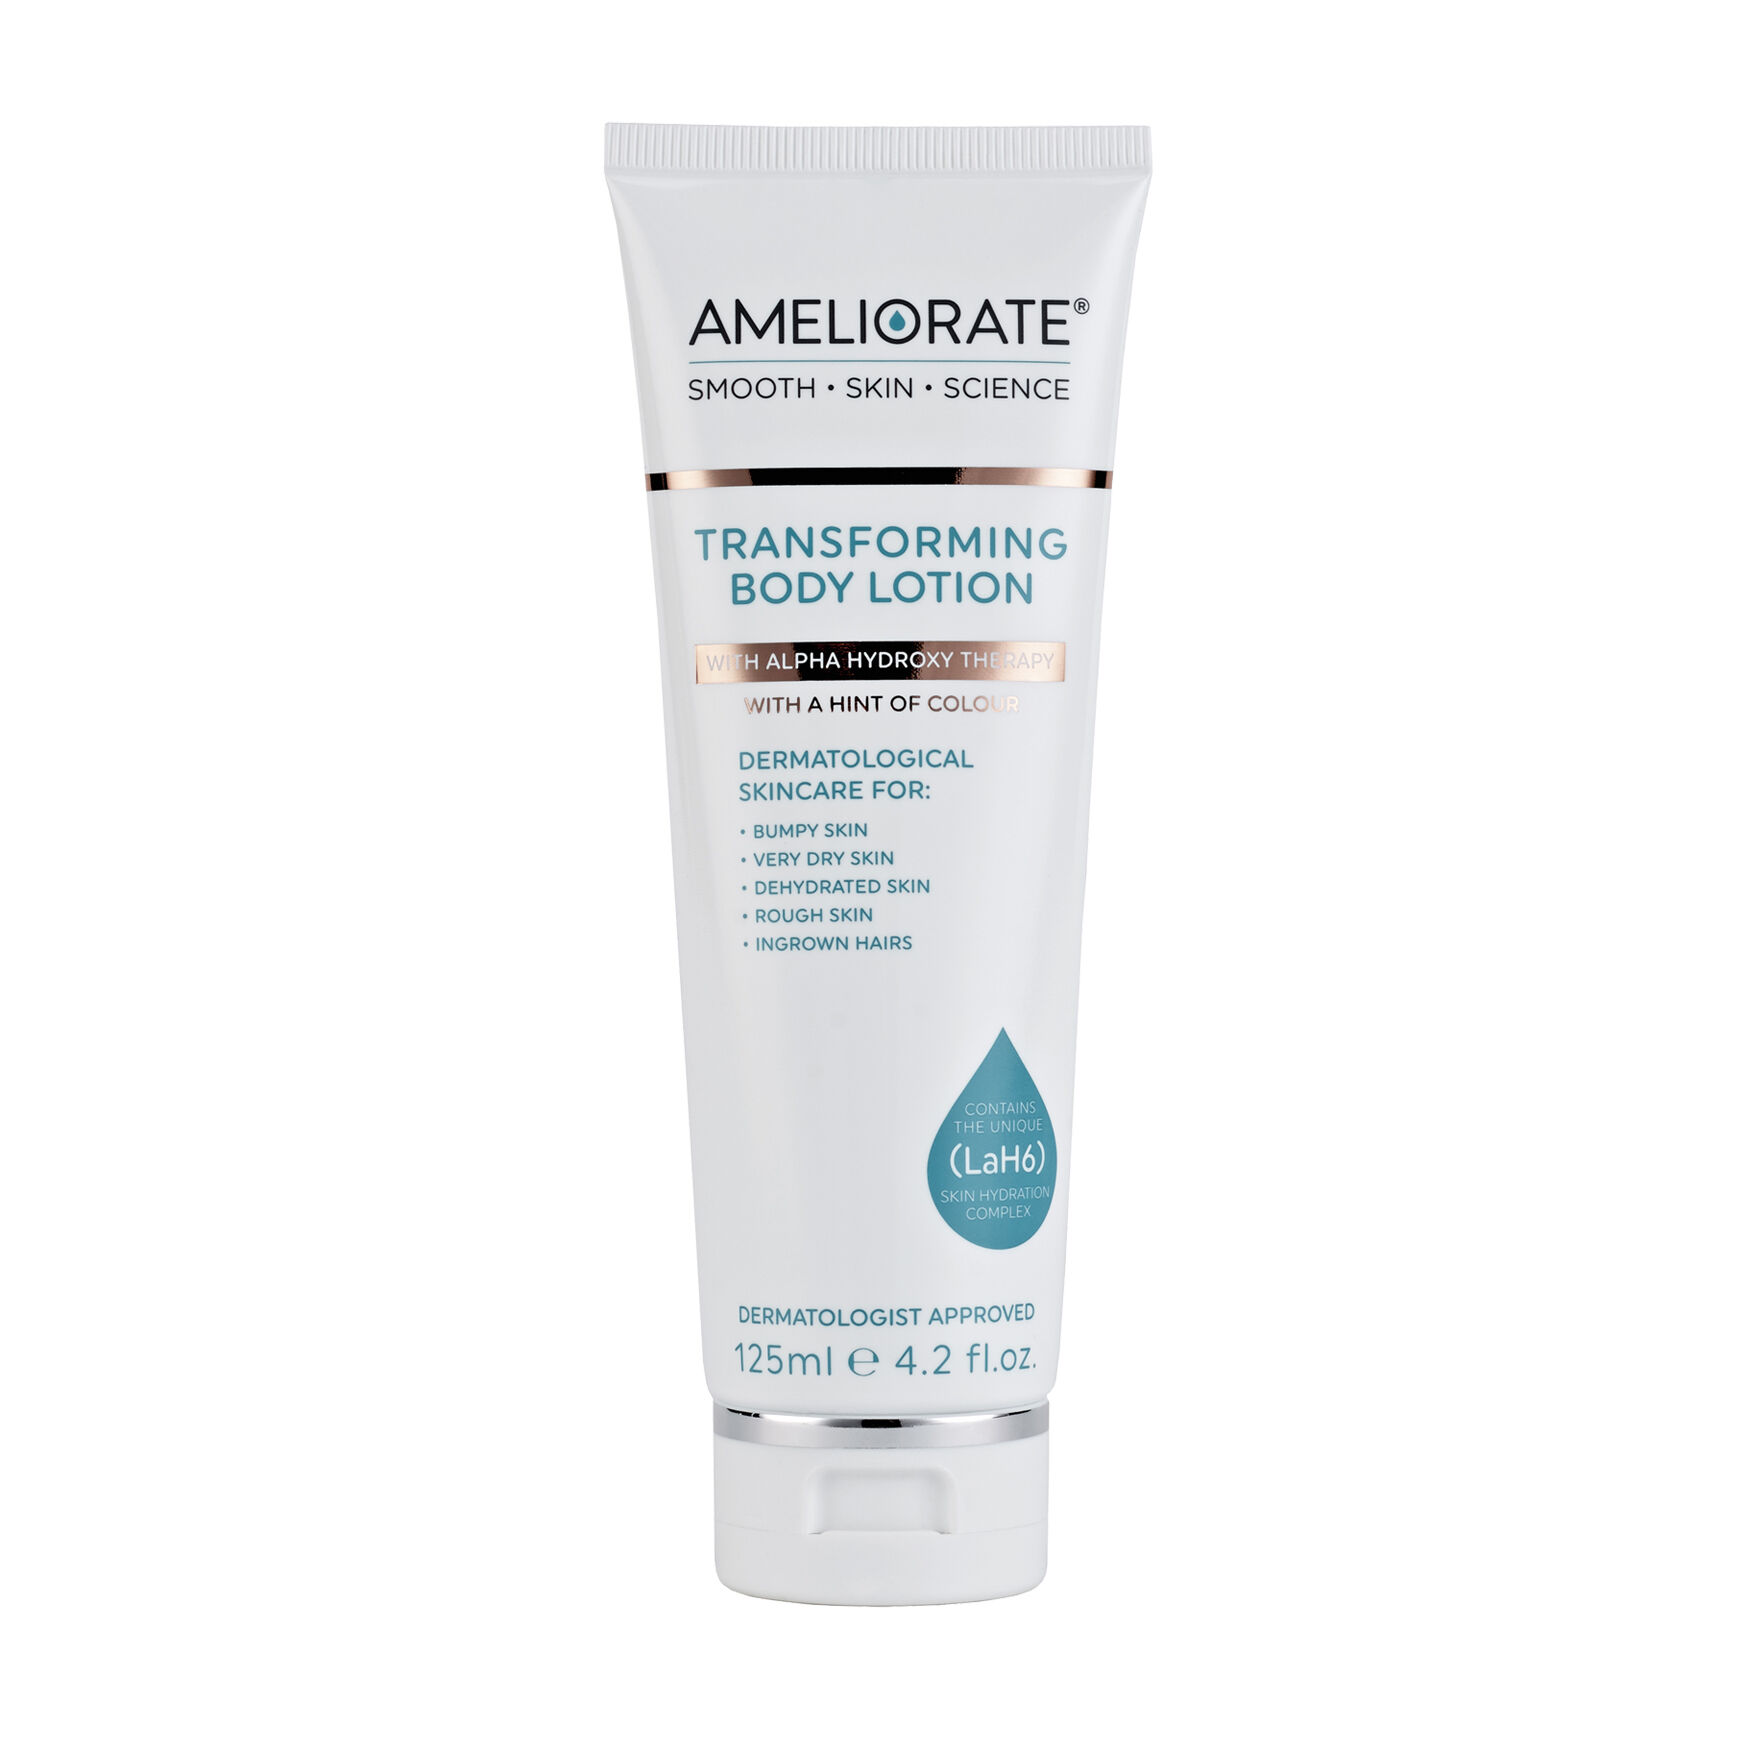 AMELIORATE TRANSFORMING BODY LOTION WITH A HINT OF COLOUR